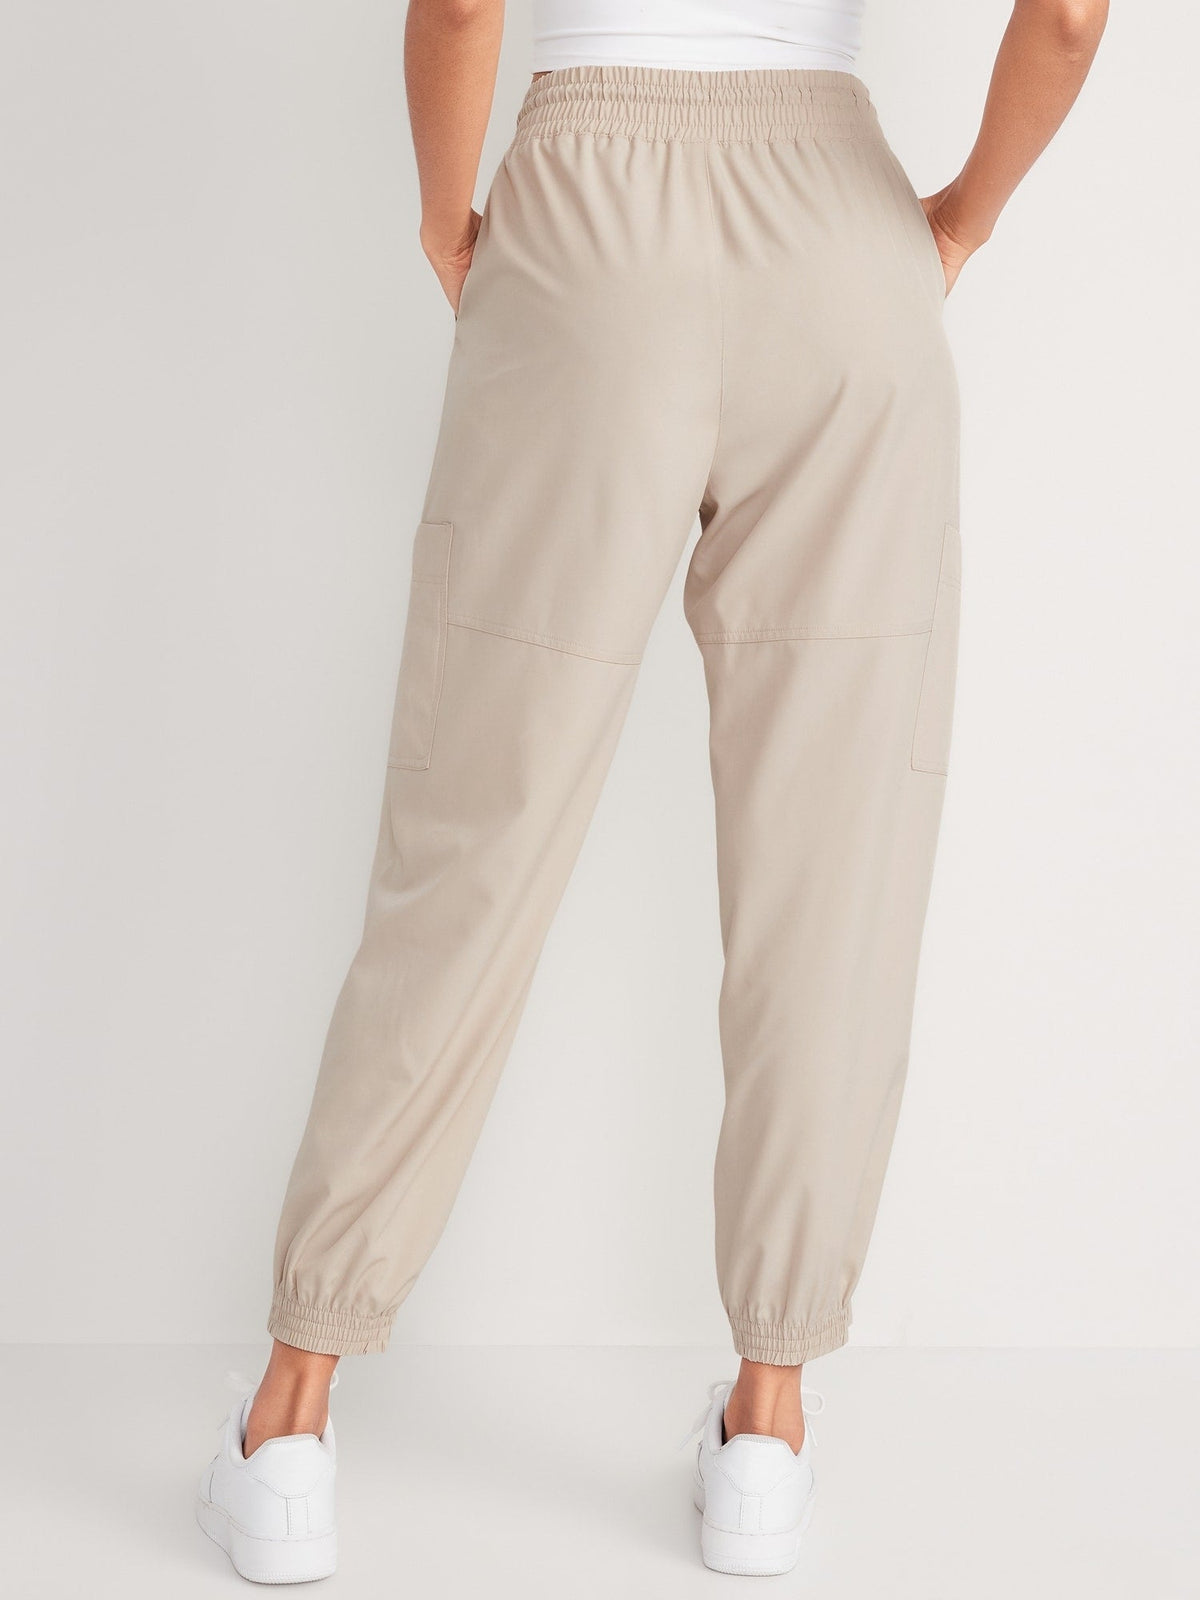 High-Waisted All-Seasons StretchTech Water-Repellent Jogger Pants